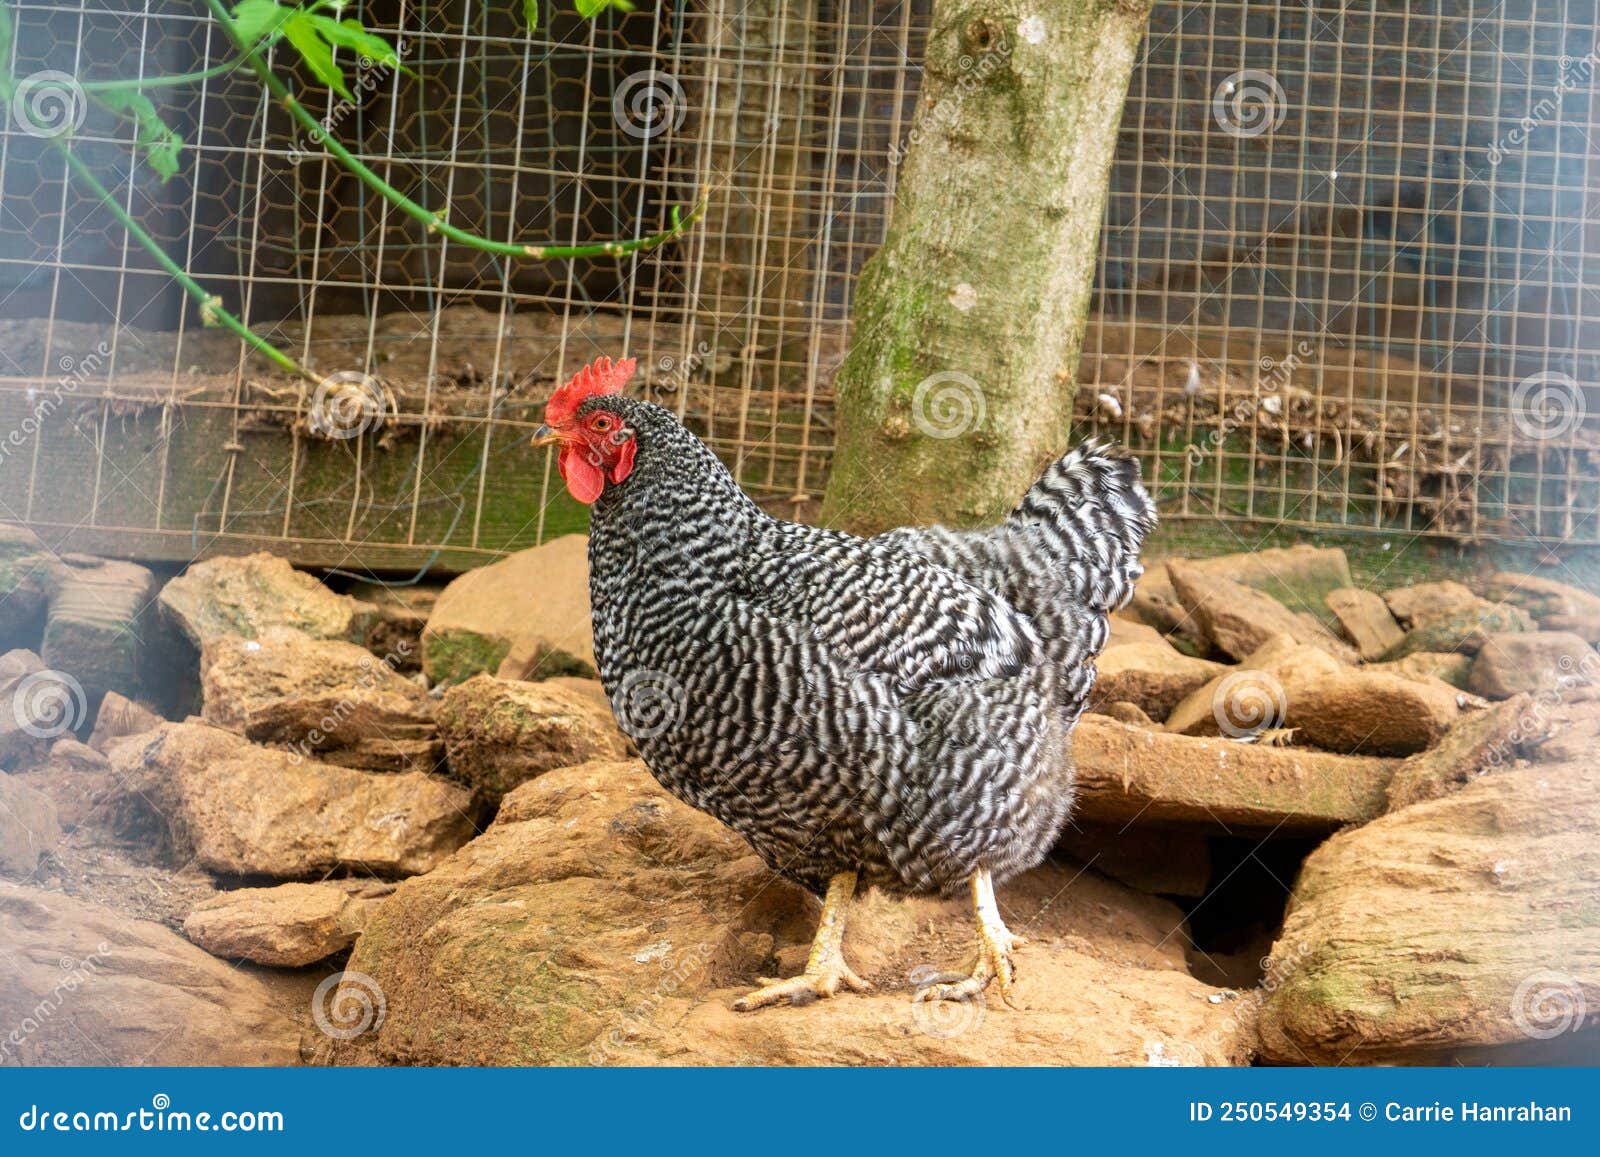 plymouth rock chicken standing on a rock